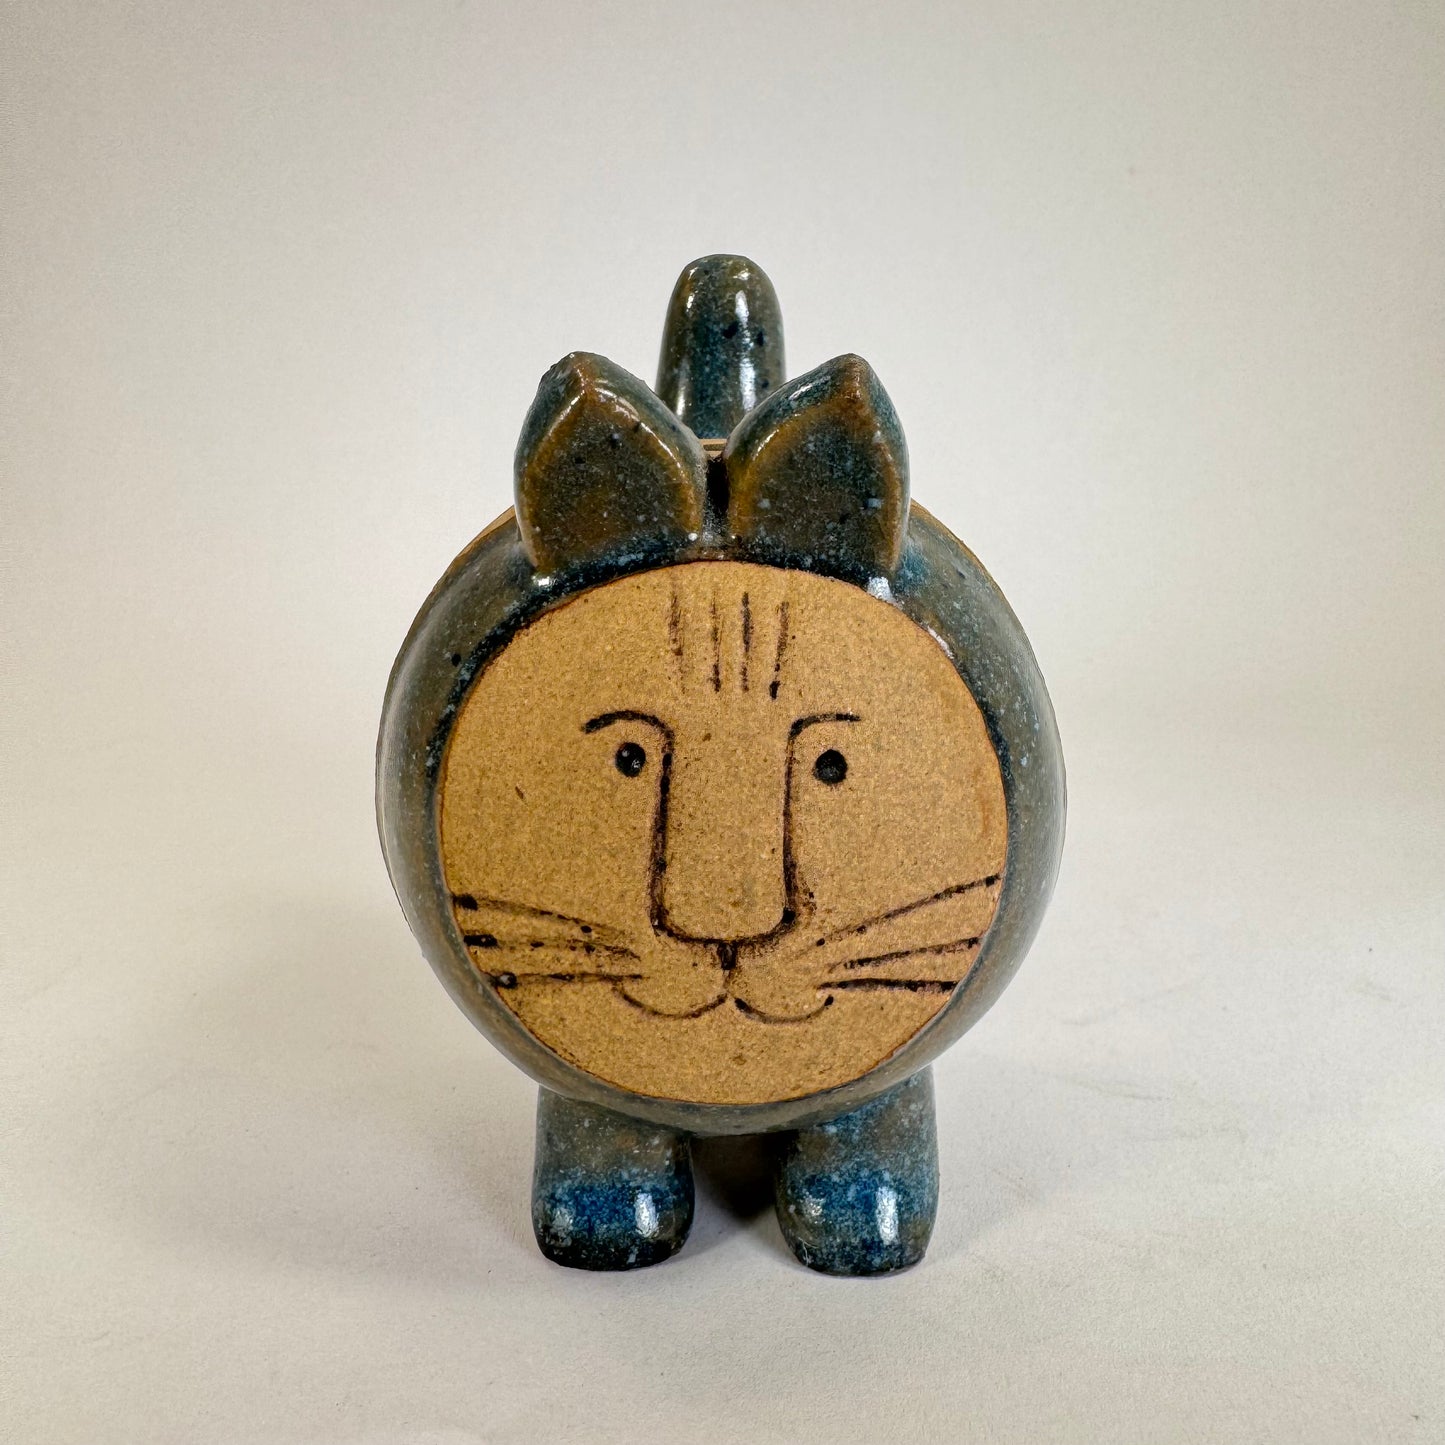 Stoneware cat from the series ”menageri” by Lisa Larson